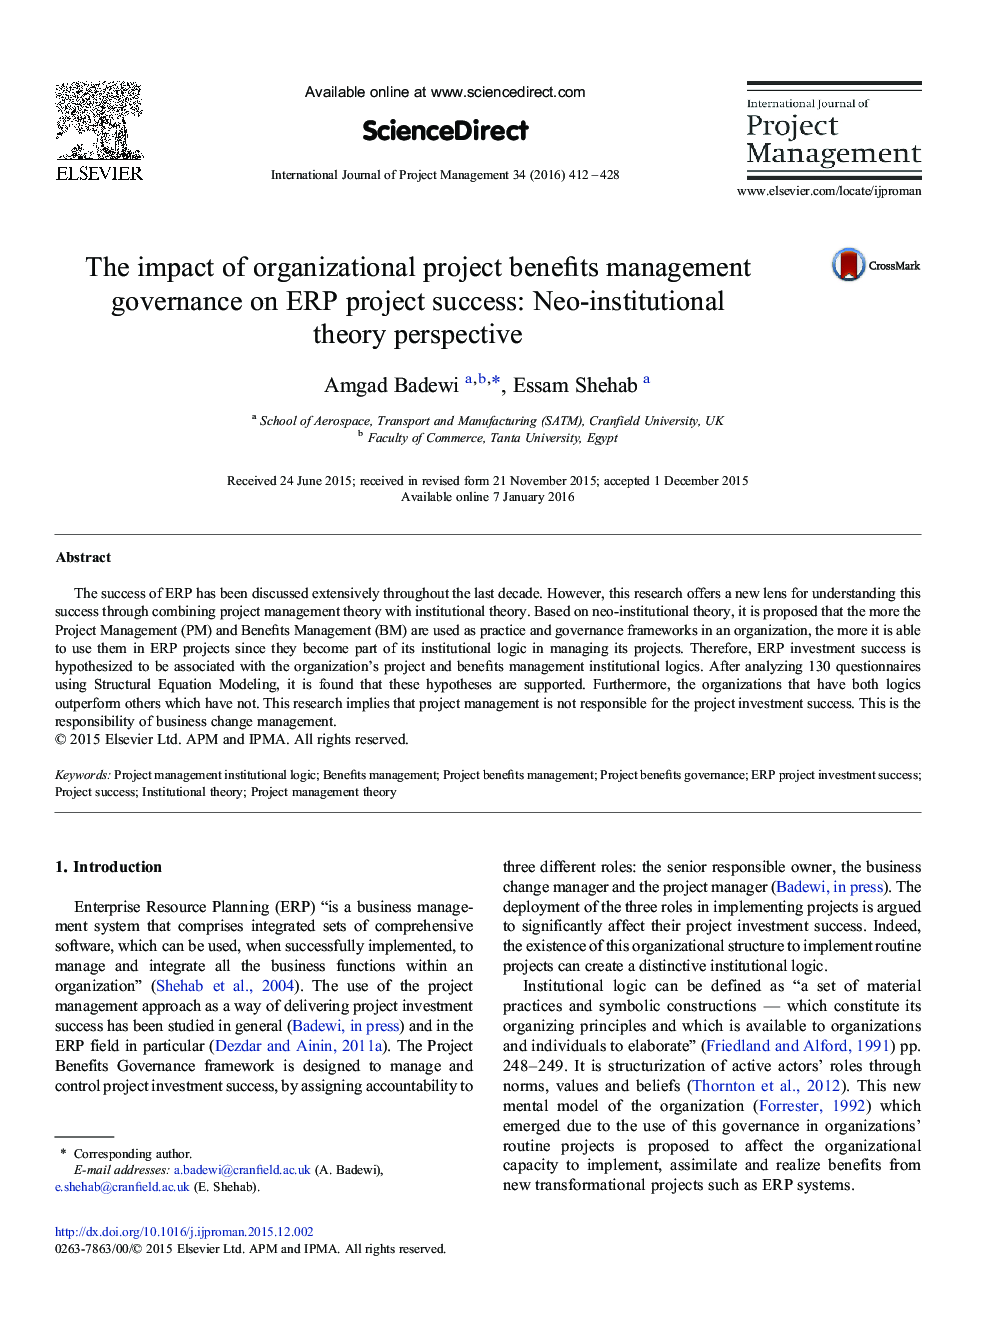 The impact of organizational project benefits management governance on ERP project success: Neo-institutional theory perspective